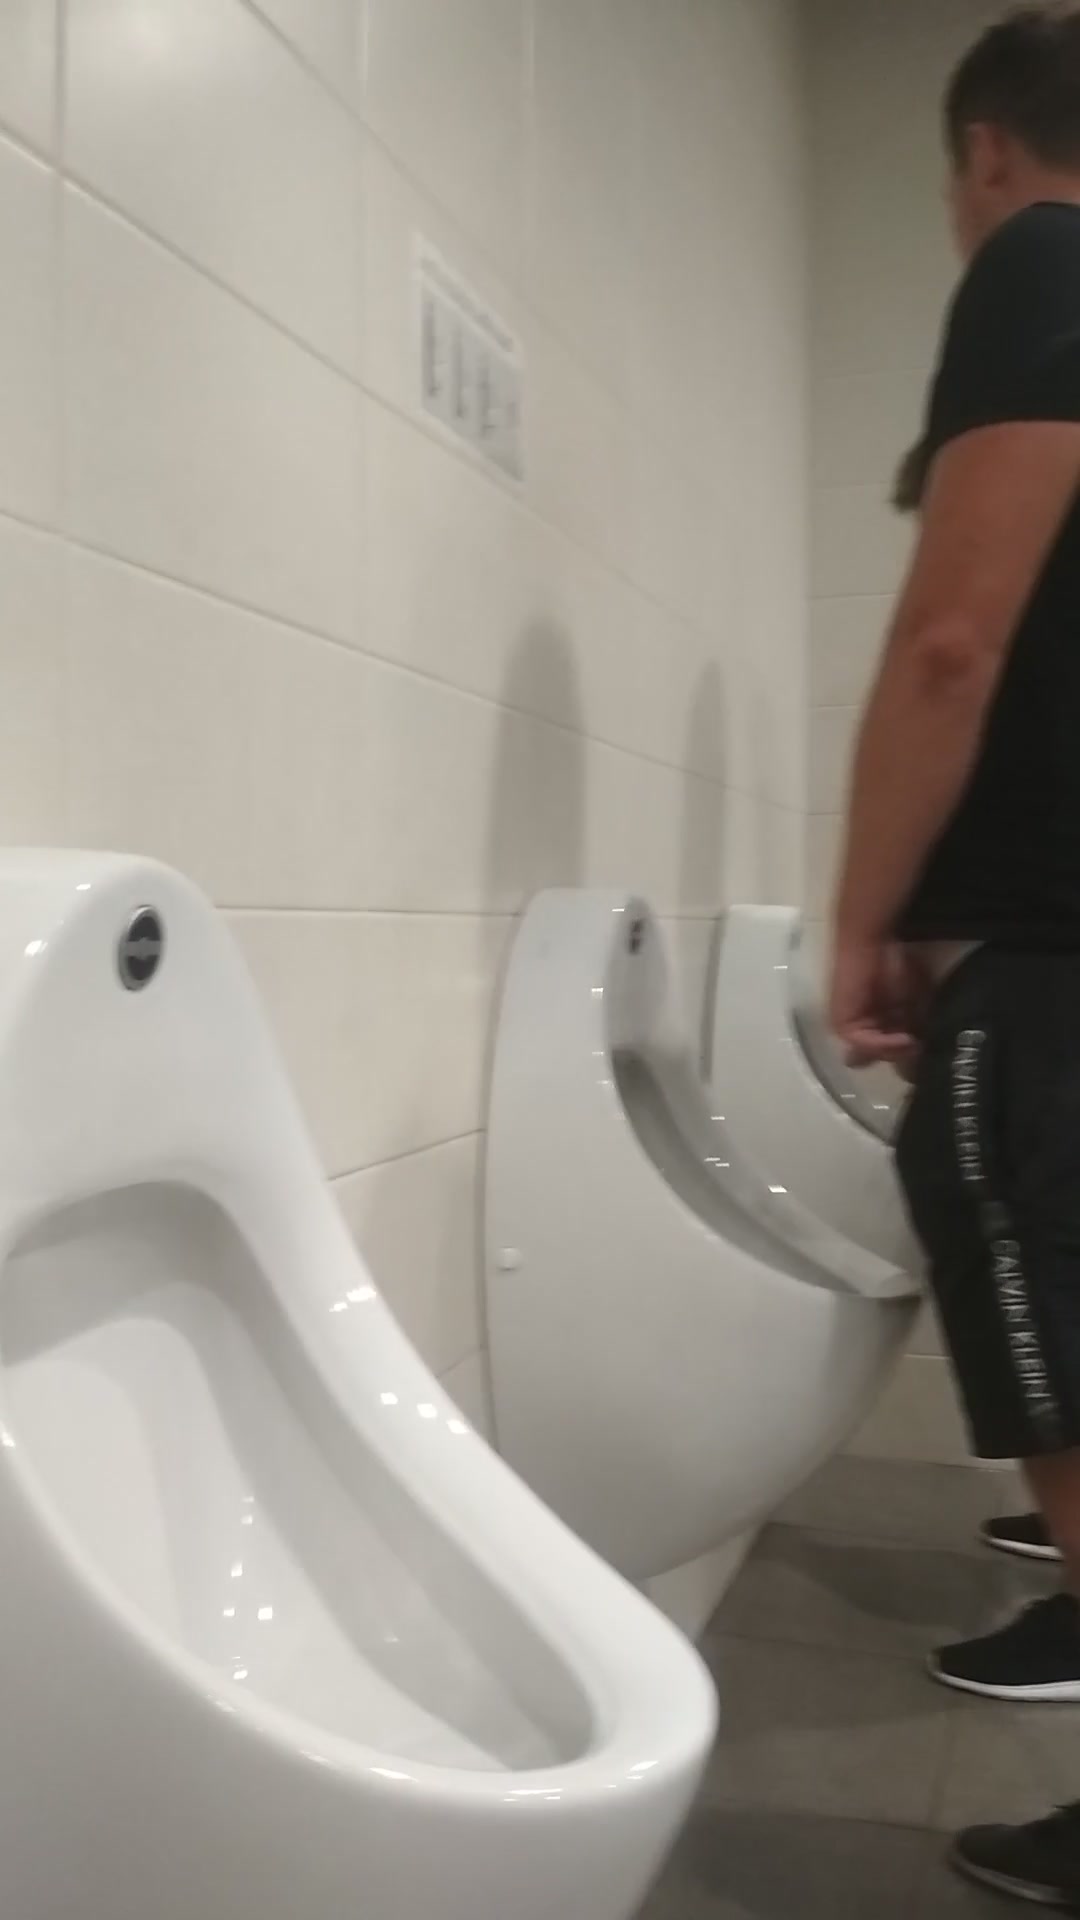 Pissing in the toilet - video 8